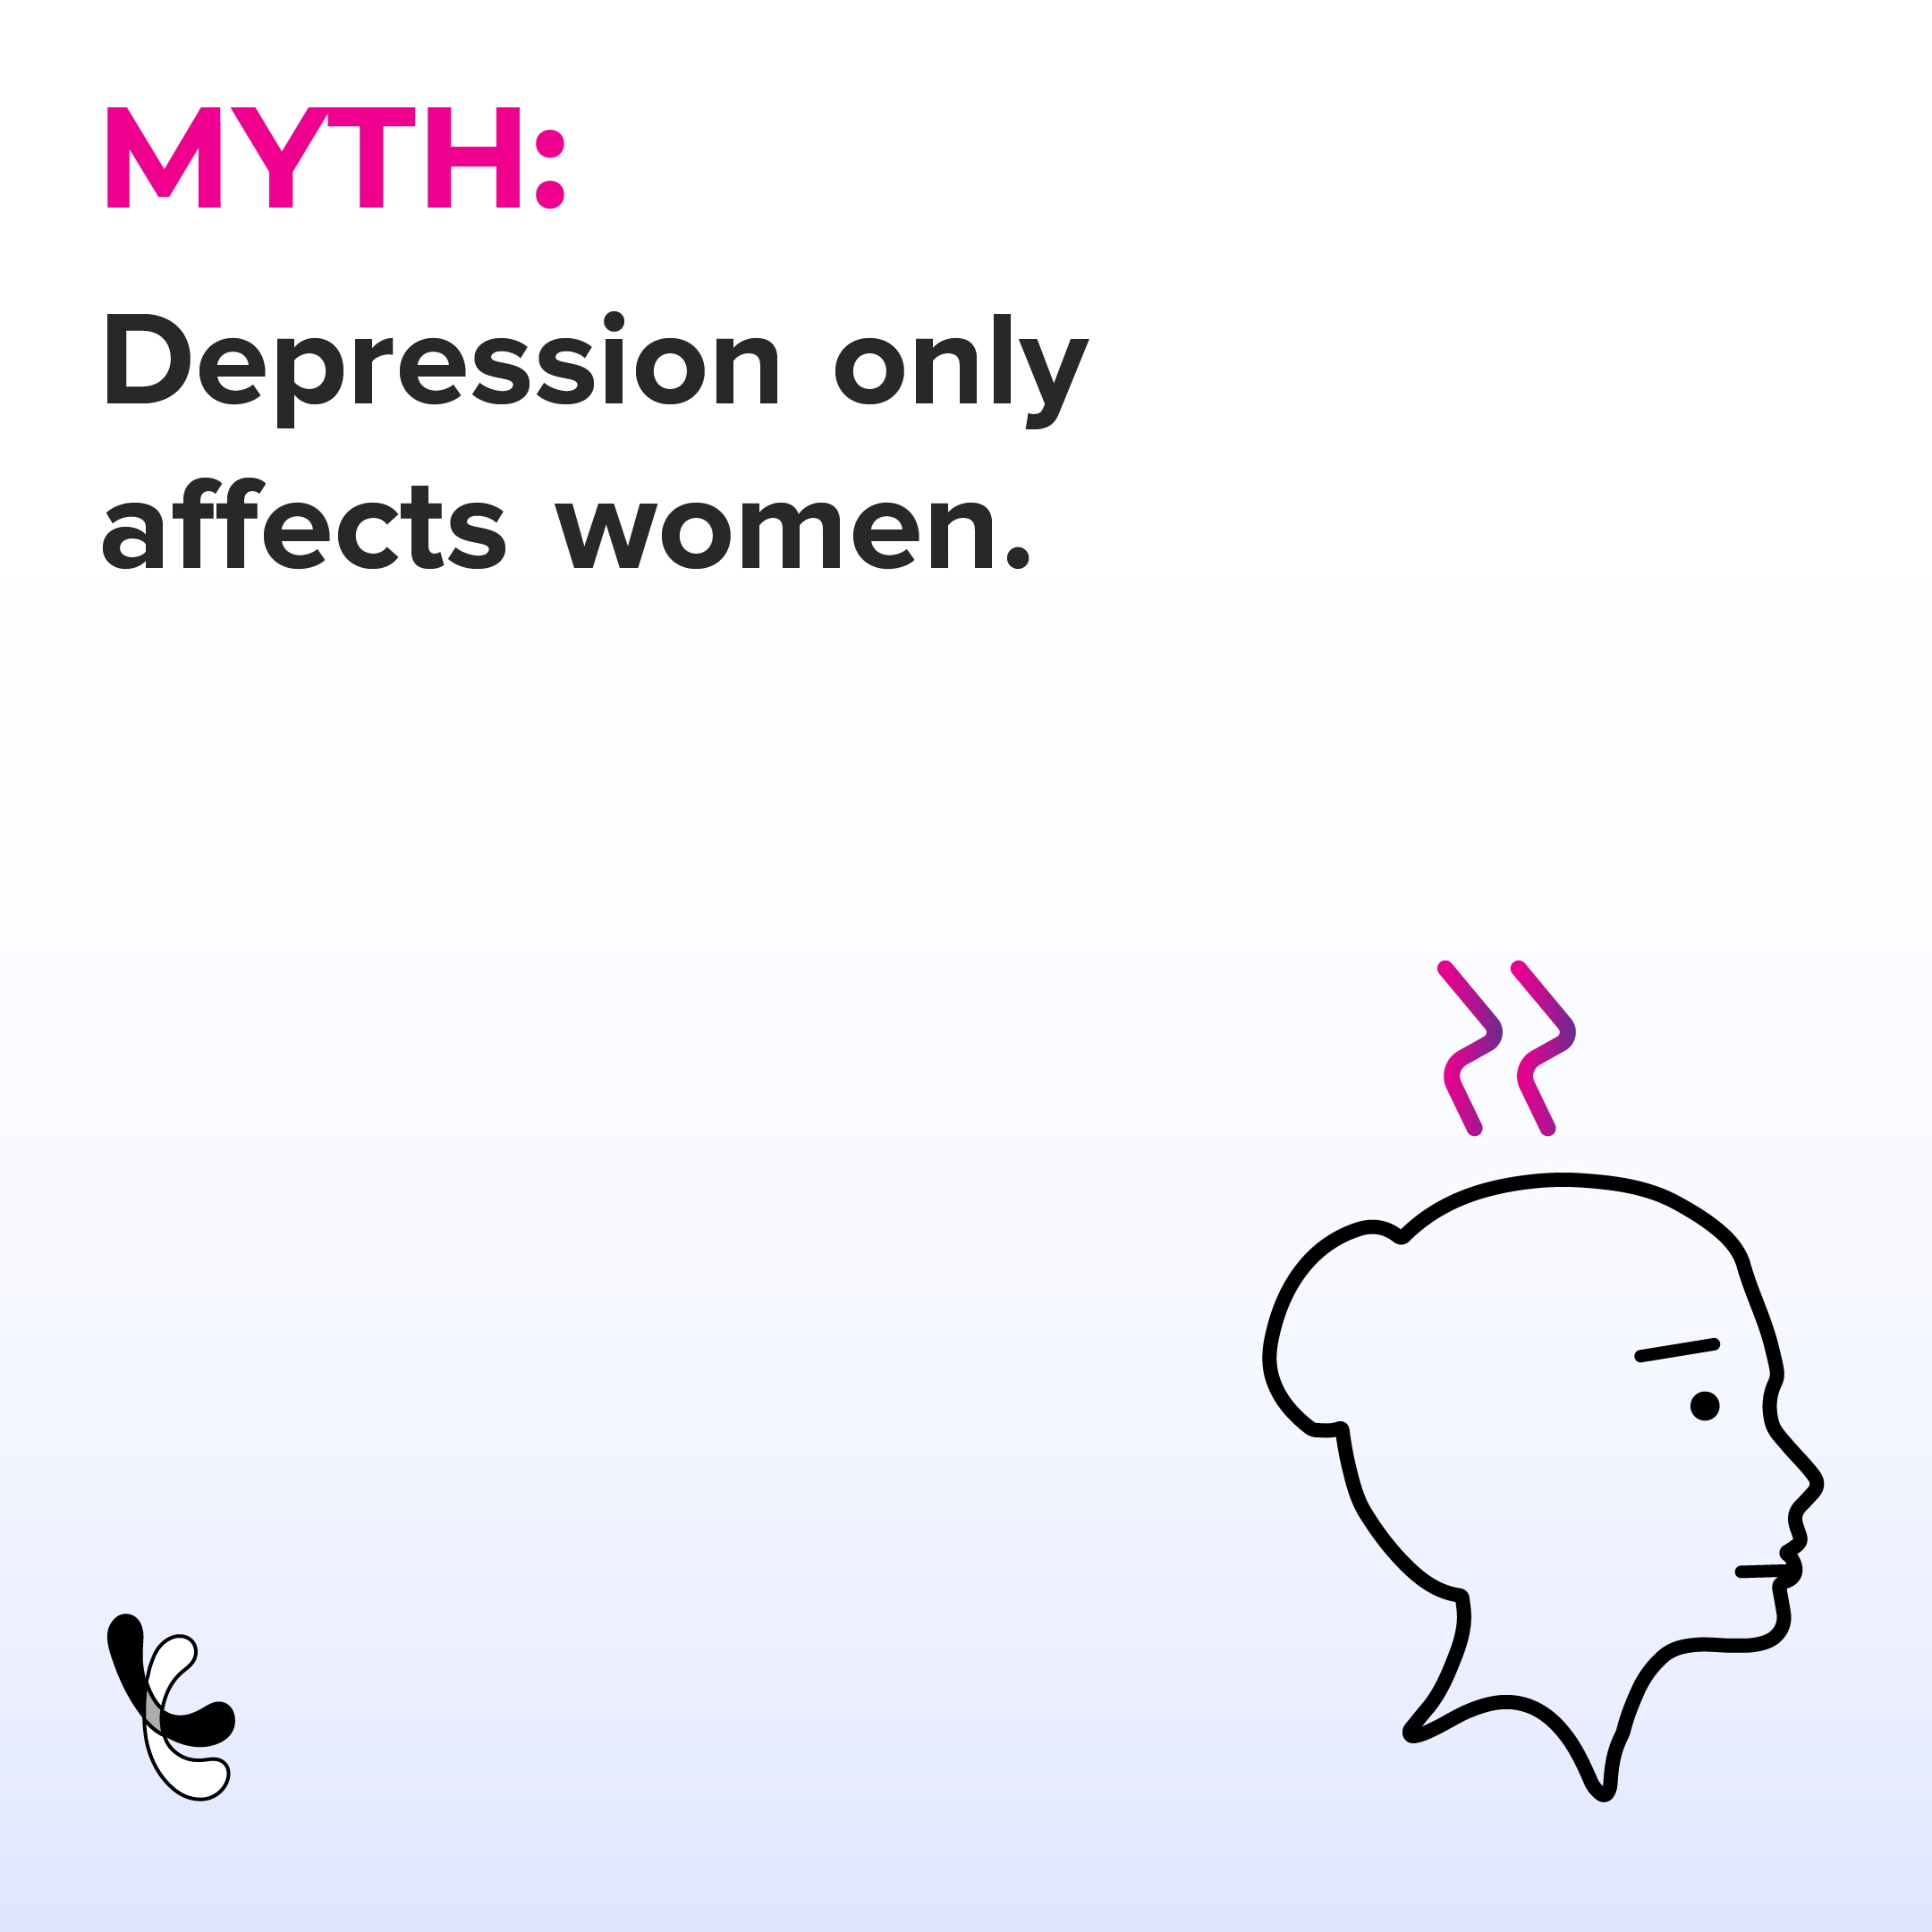 Myth about depression in women